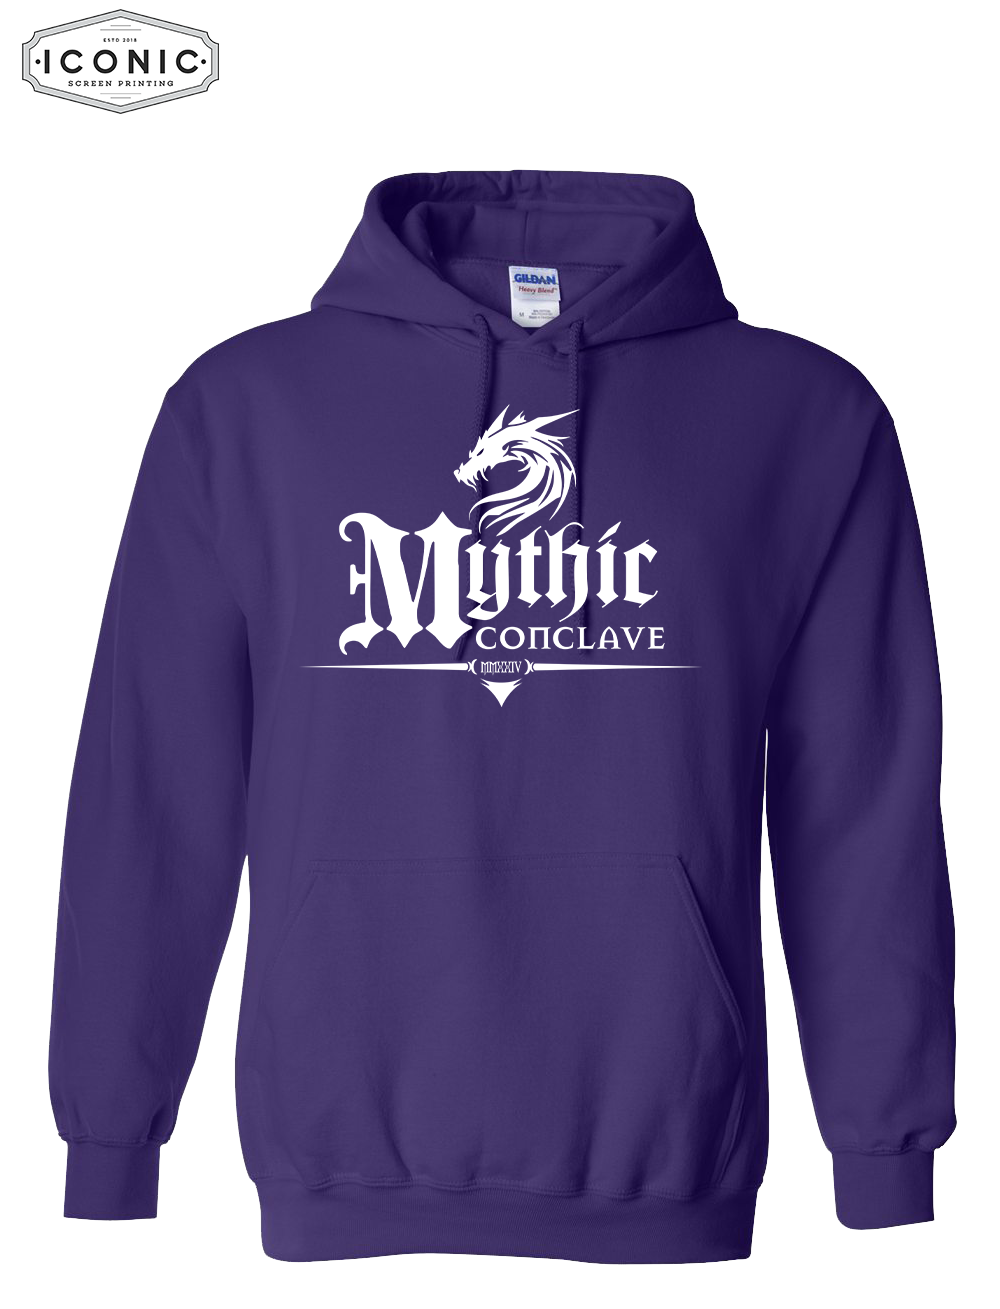 Mythic Conclave Heavy Blend™ Hooded Sweatshirt